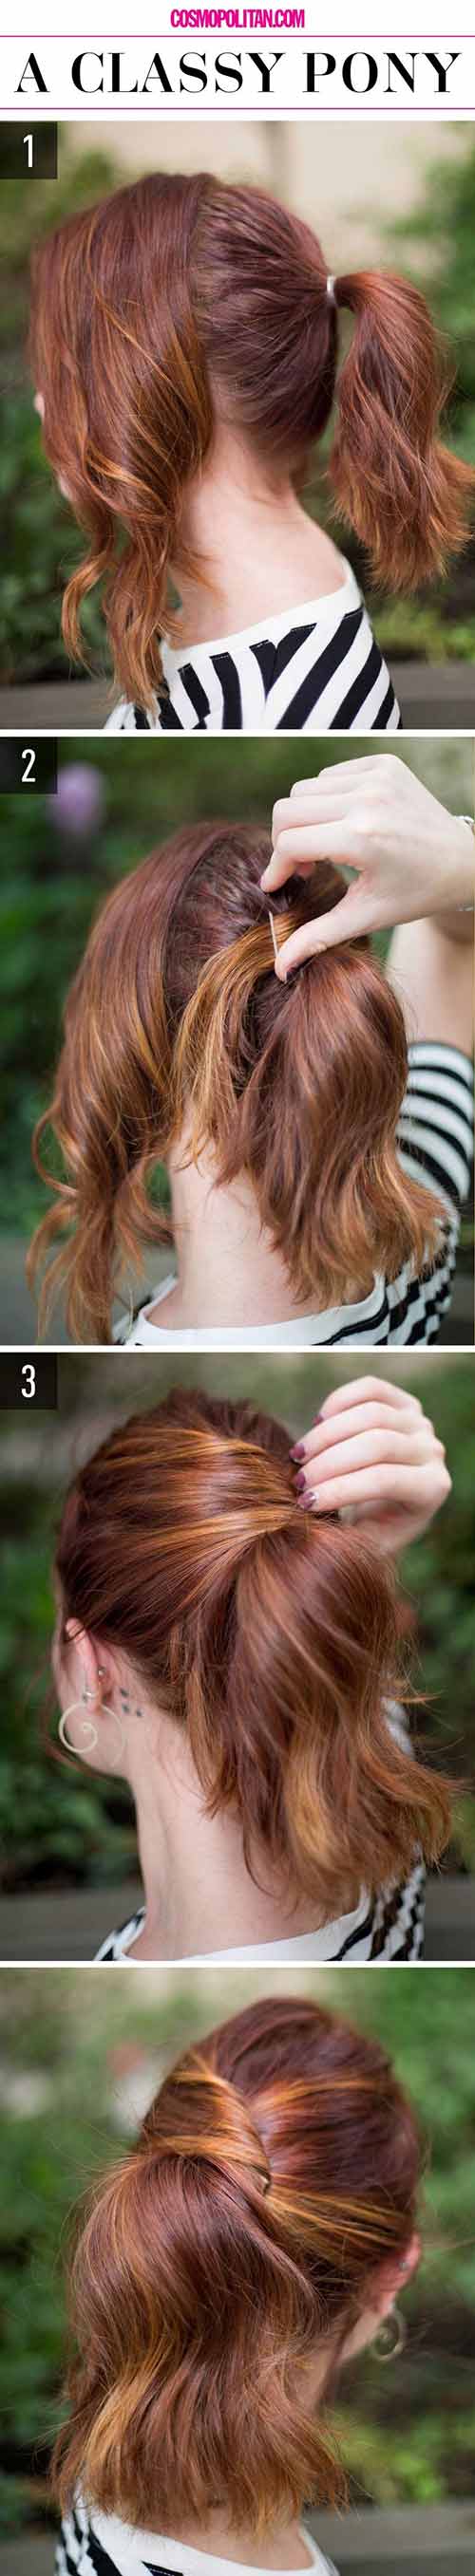 Classy pony hairstyle for school